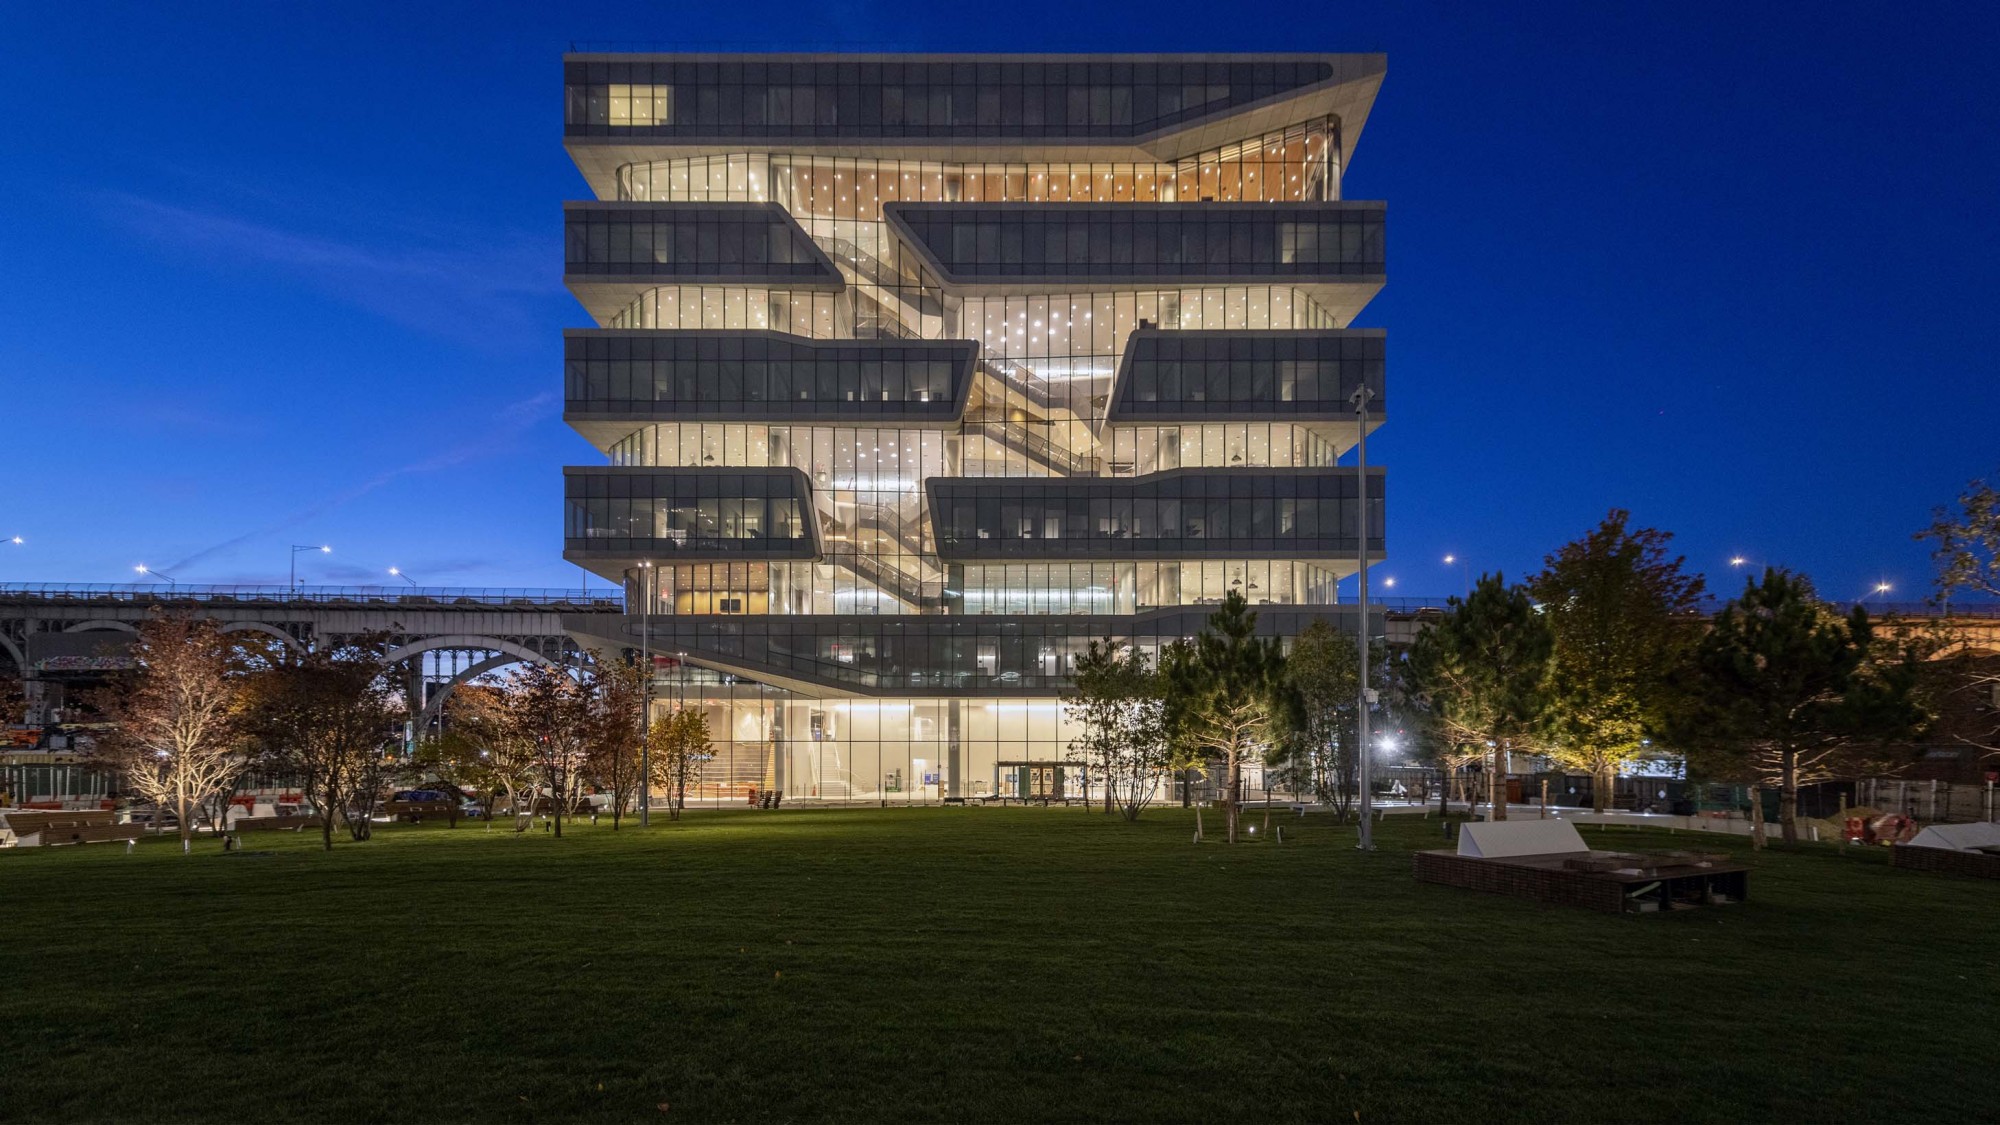 A photo of the new Columbia Business School during the evening with the lights turned on in the building